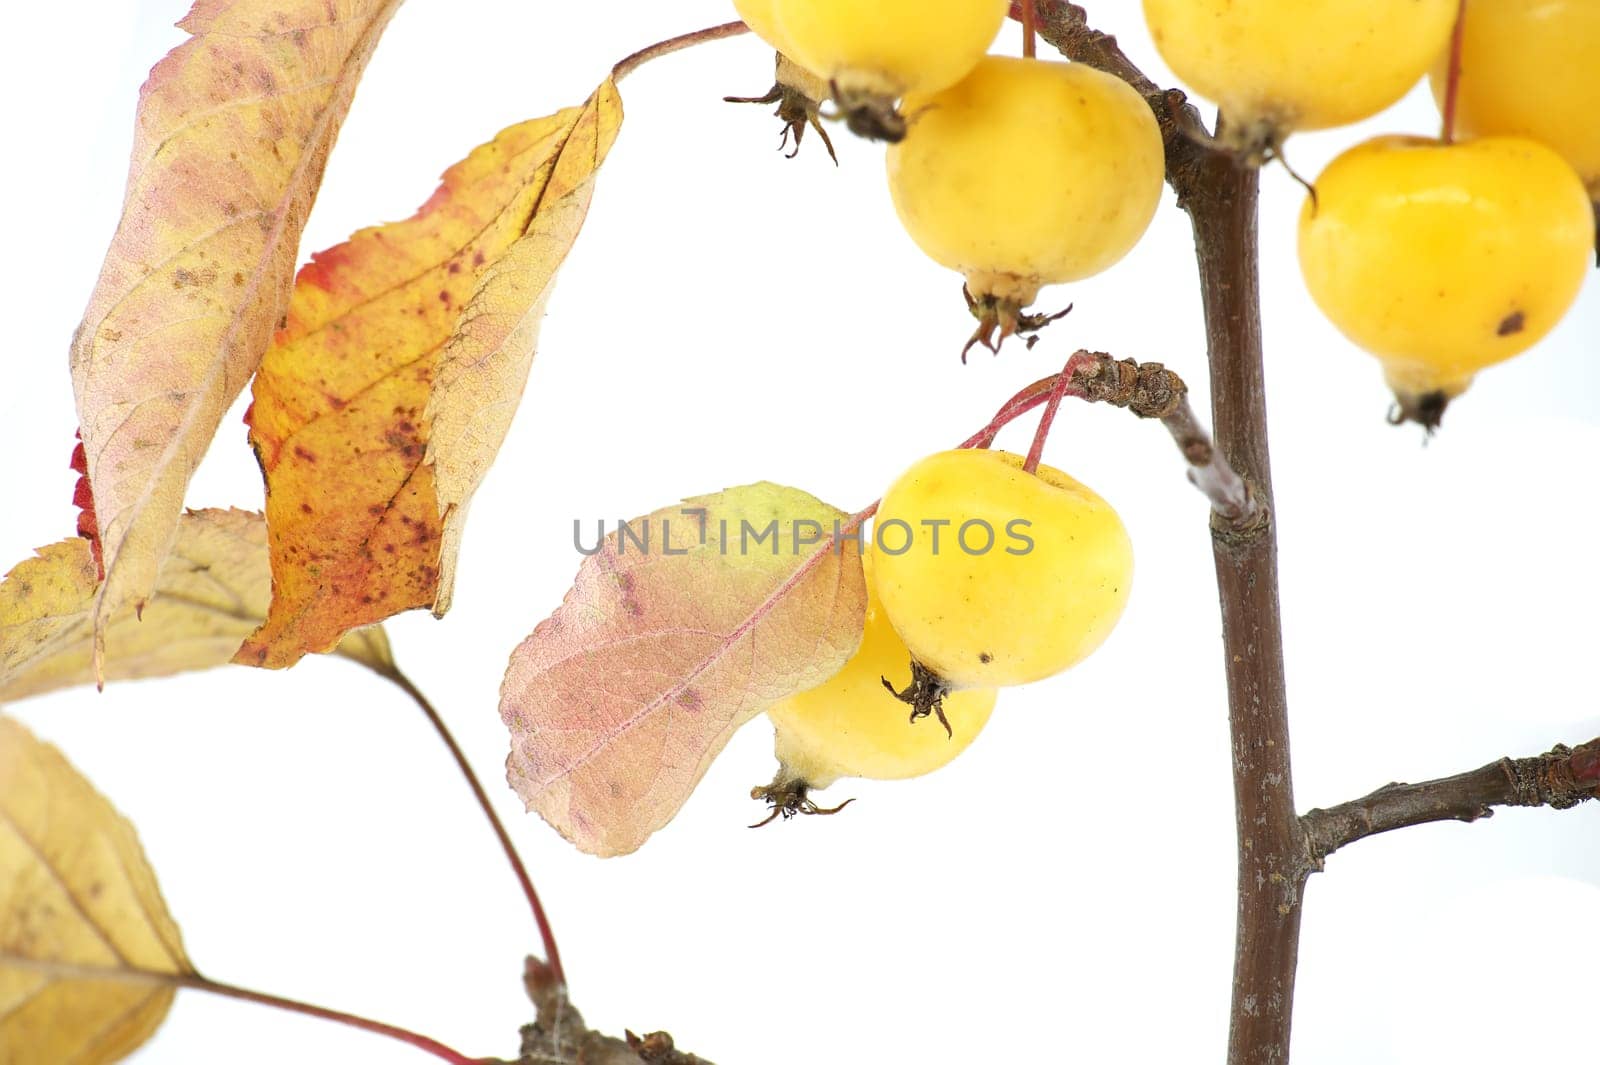 Ripe crab apples on the branch isolated on white background. Malus sylvestris, European crab apple, European wild apple or simply the crab apple